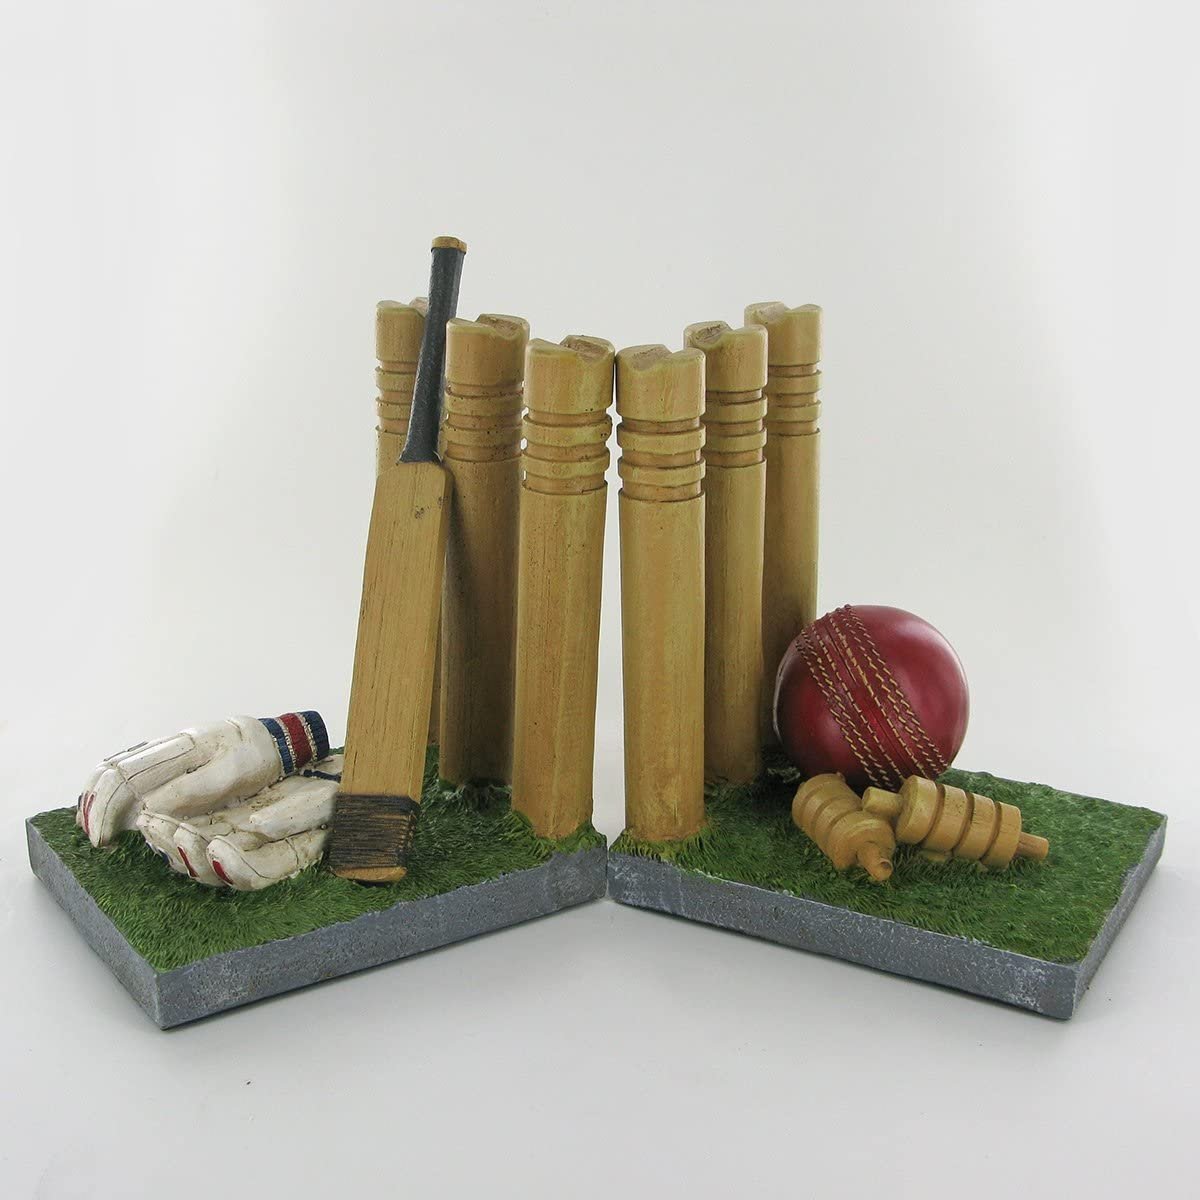 Cricket Lovers Gifts, India Cricket, Why Do Most People Like Cricket?